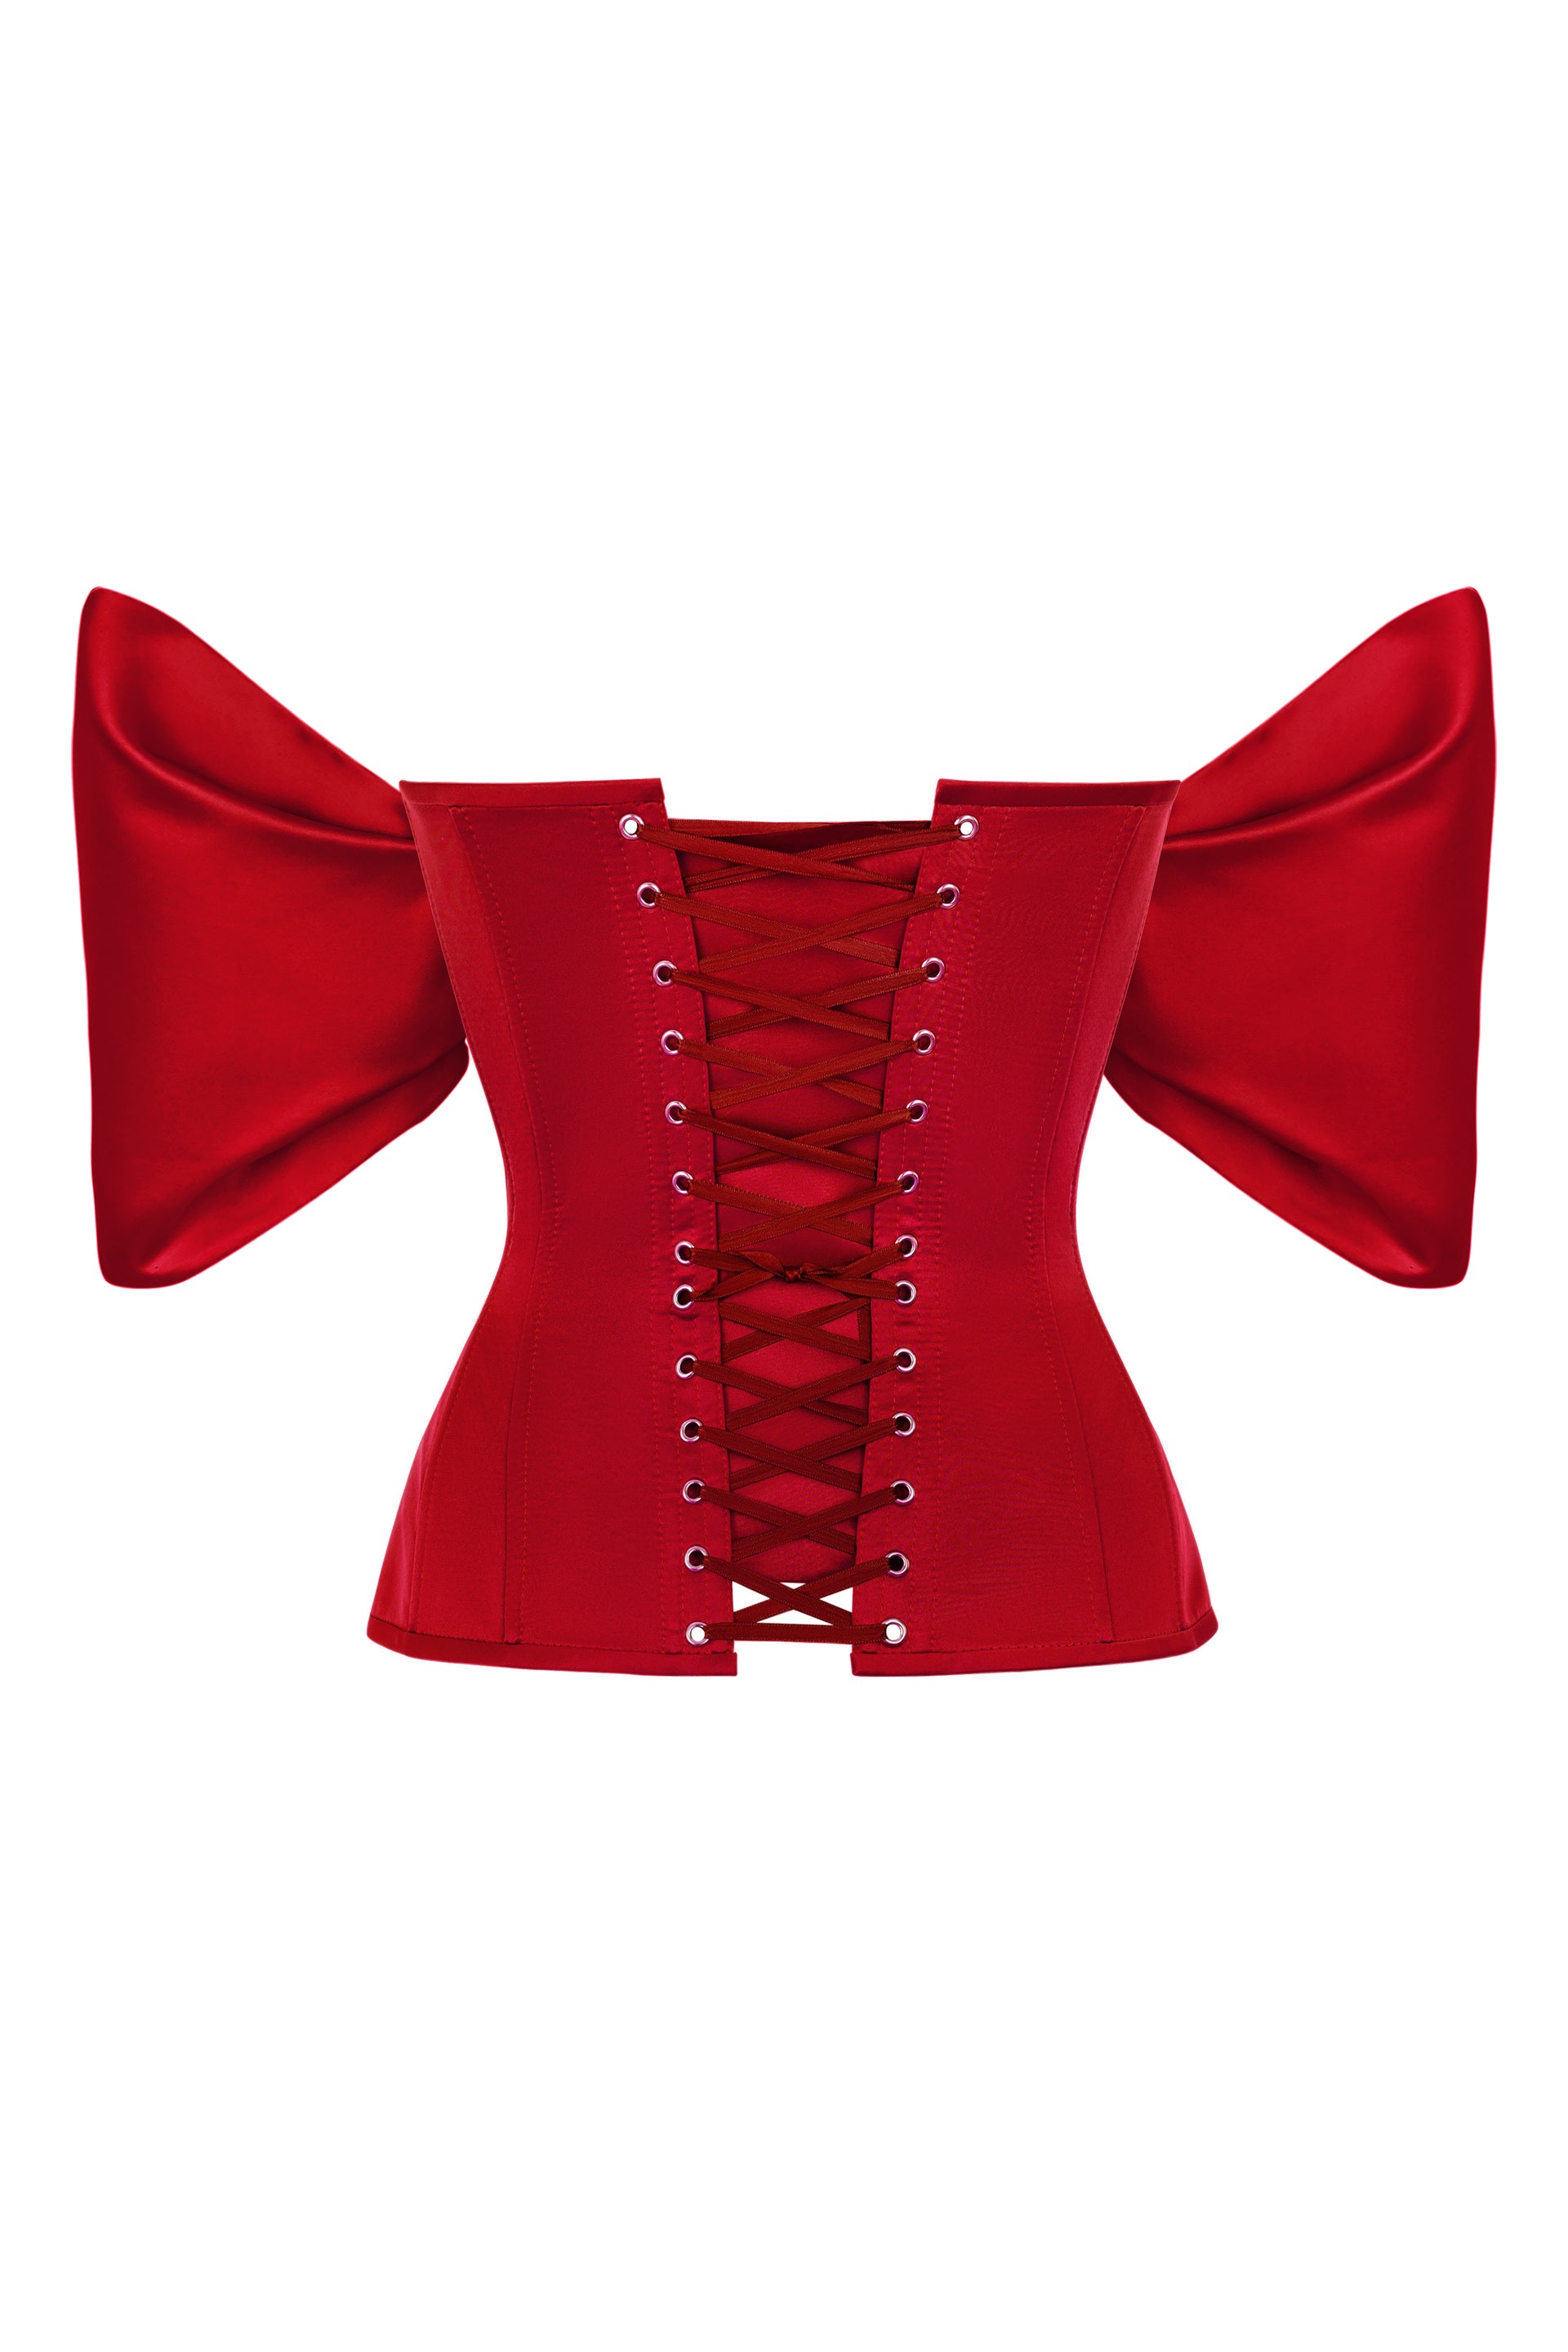 Red satin corset with detachable sleeves